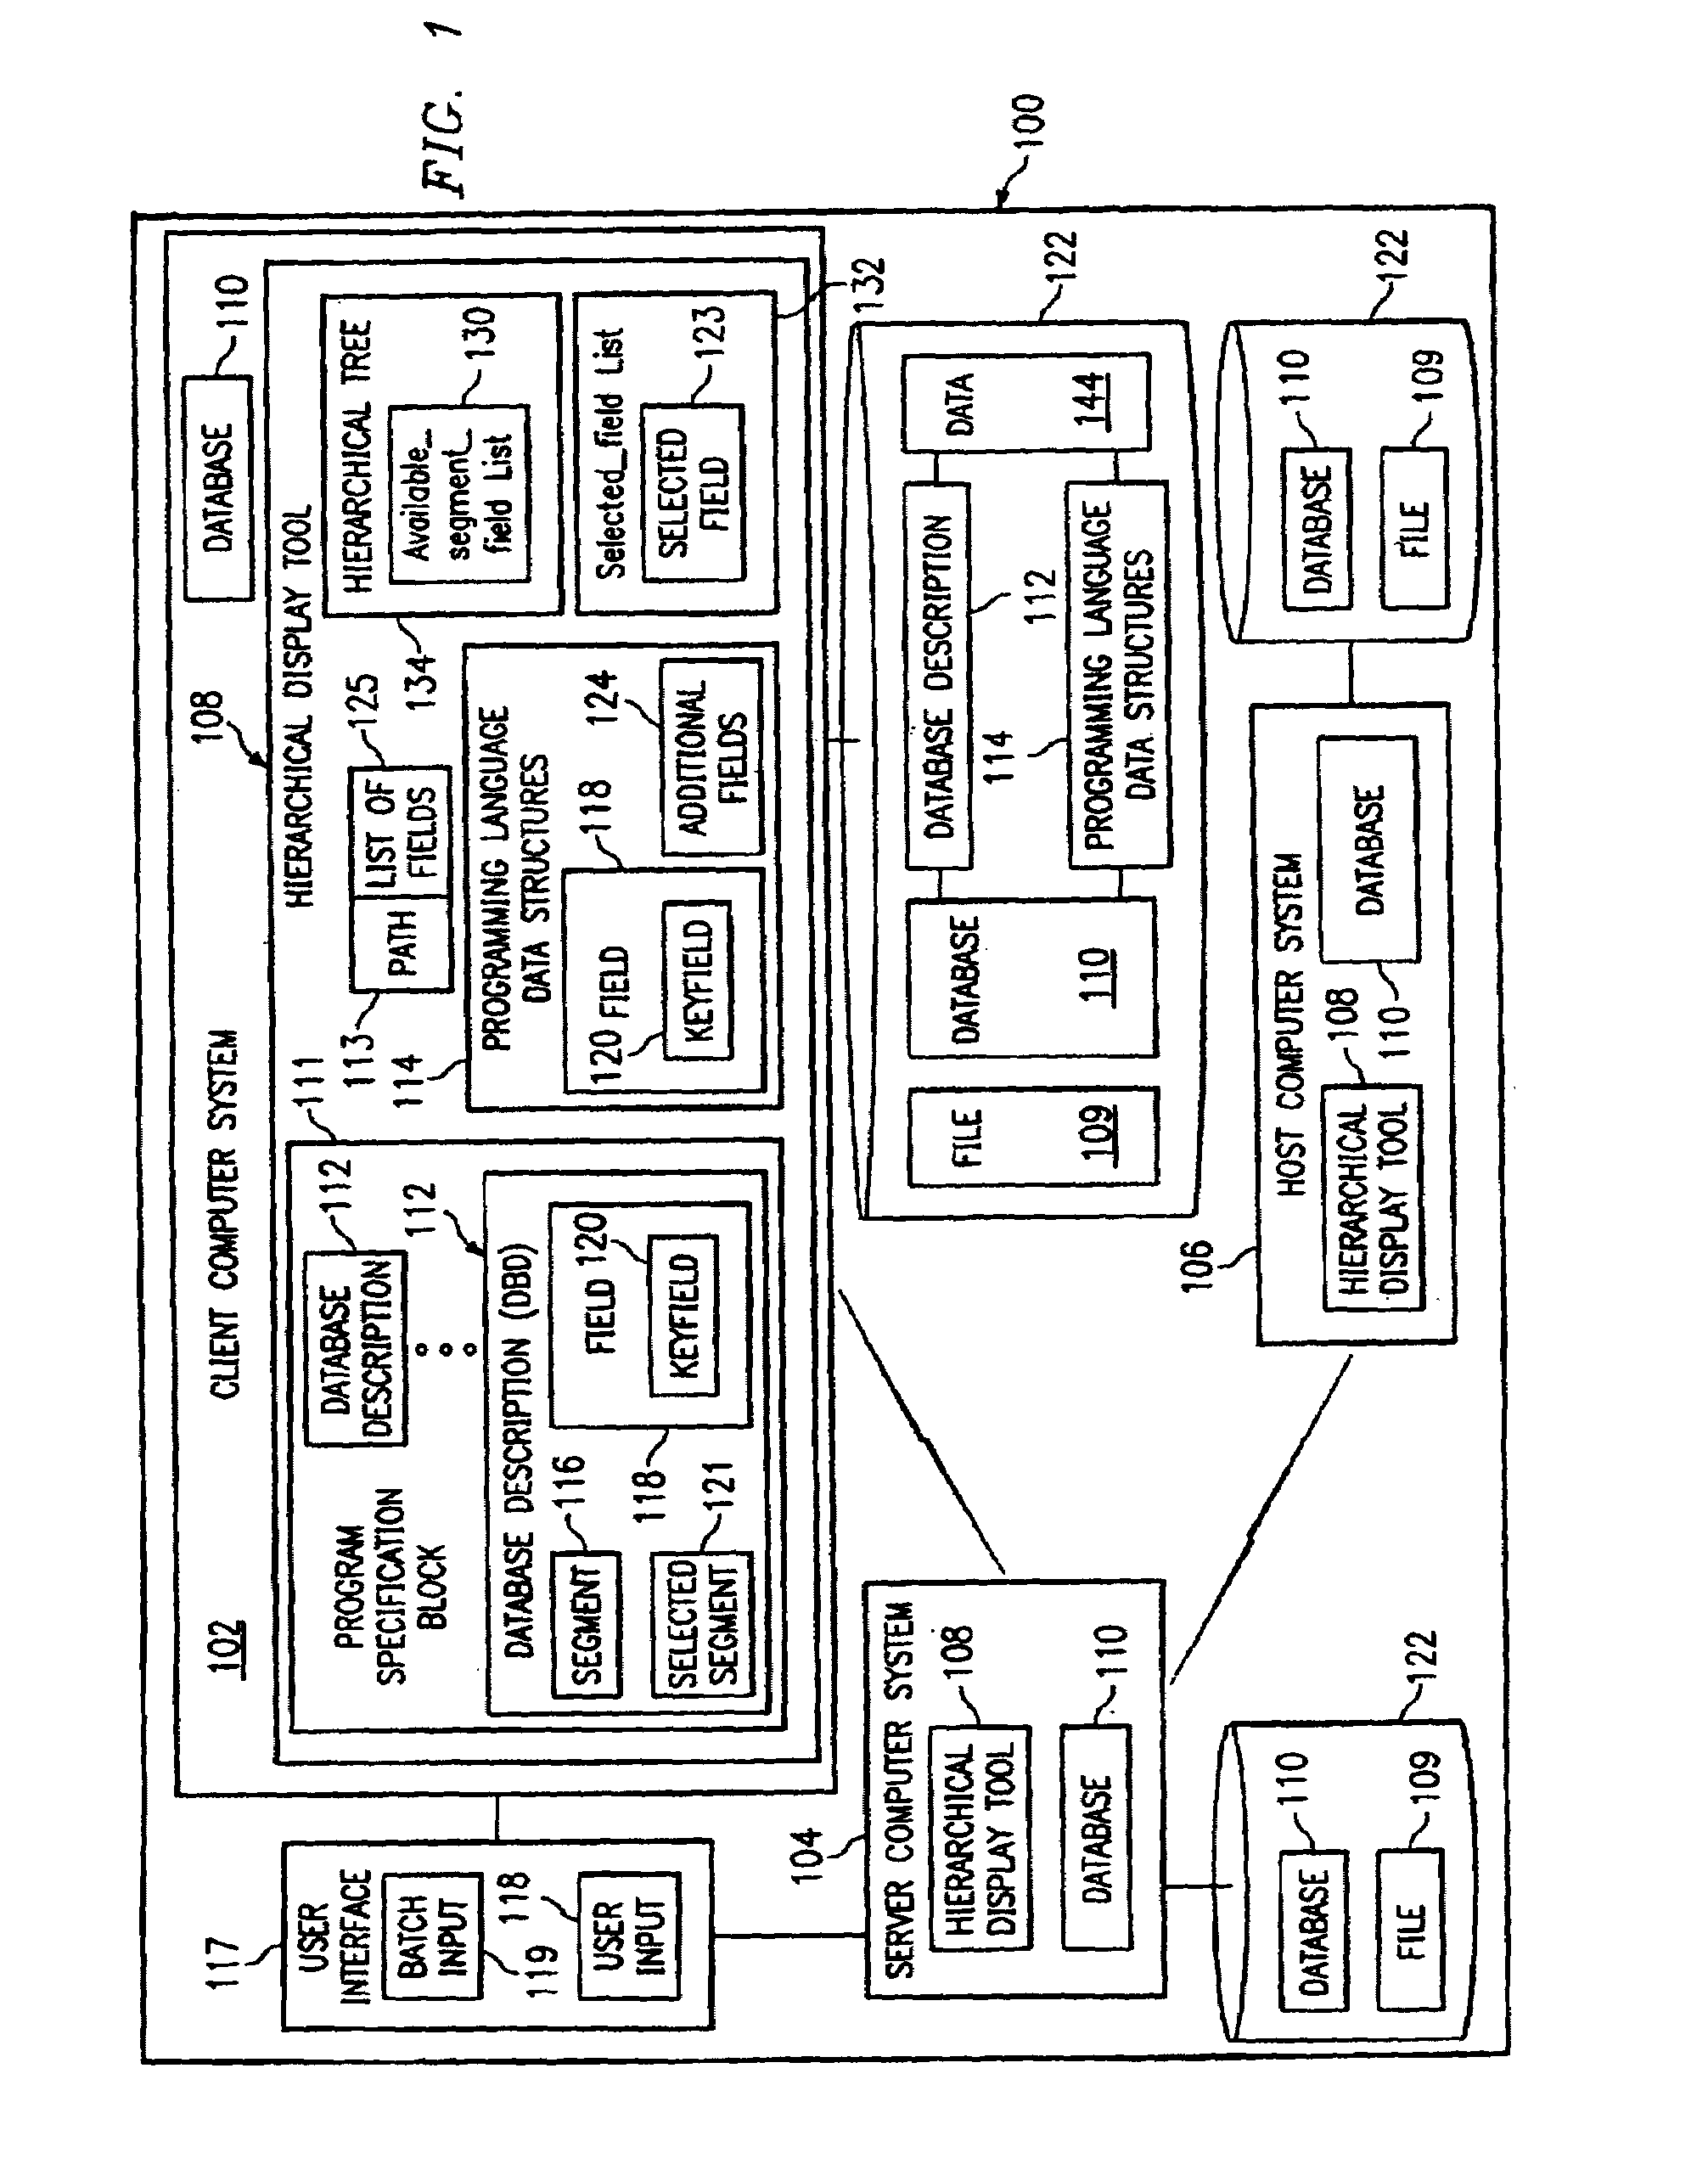 Systems, methods, and computer program products to display and select hierarchical database segments and fields